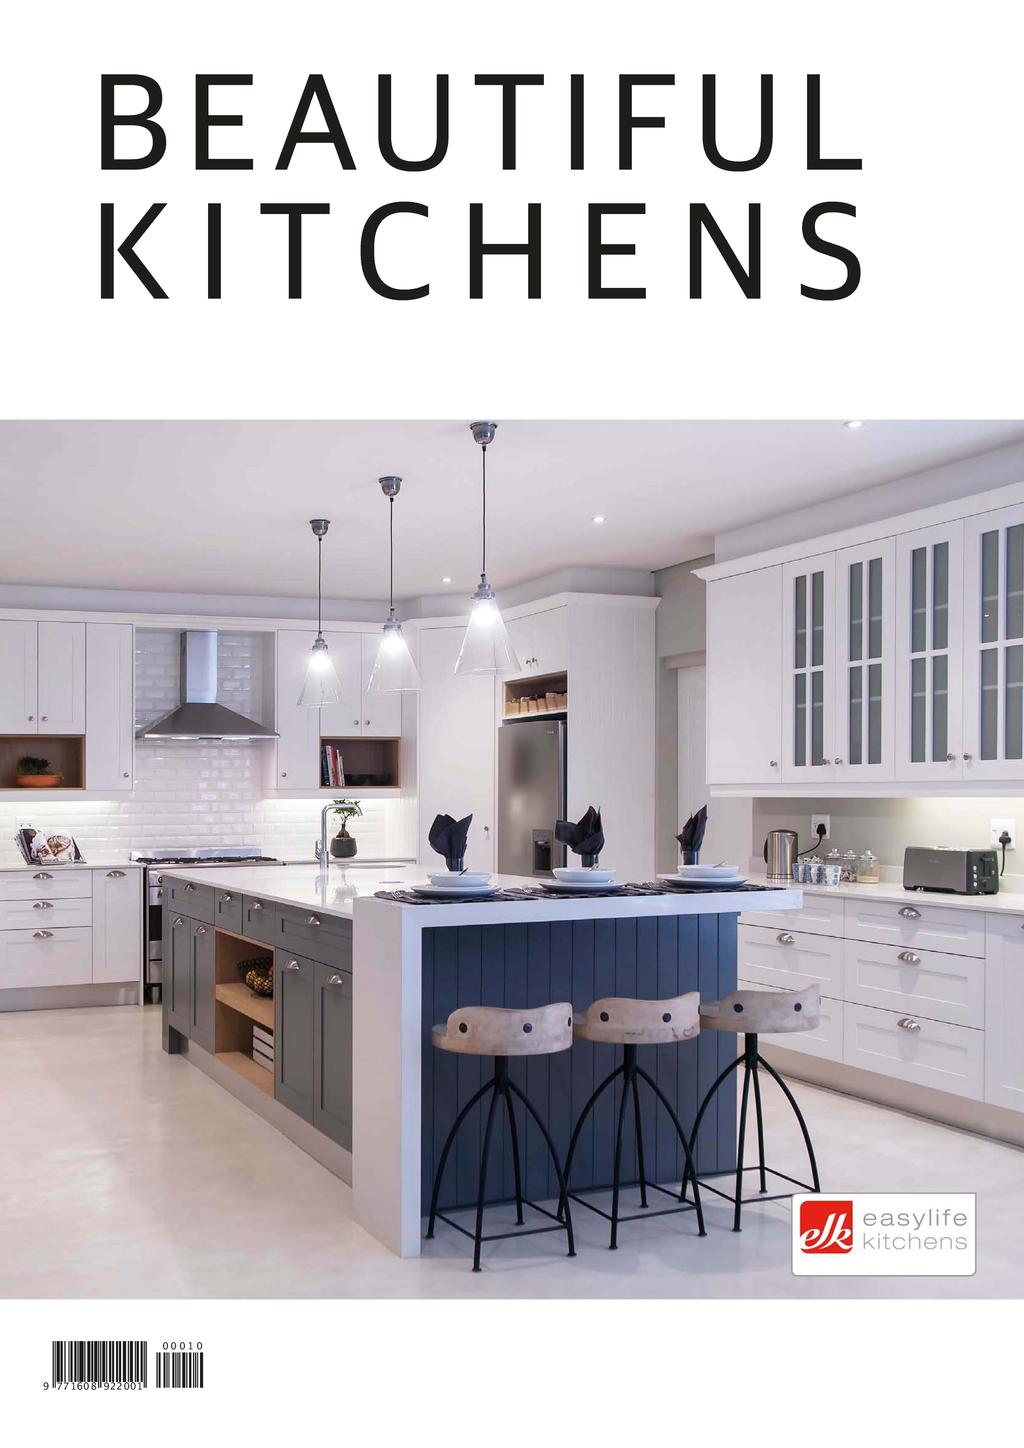 Spring 2015 AND APPLIANCE S SOUTH AFRICA S ONLY MAGAZINE DEDICATED TO KITCHENS Price: R30 (VAT incl.) Other countries: R26.32 (Tax excl.